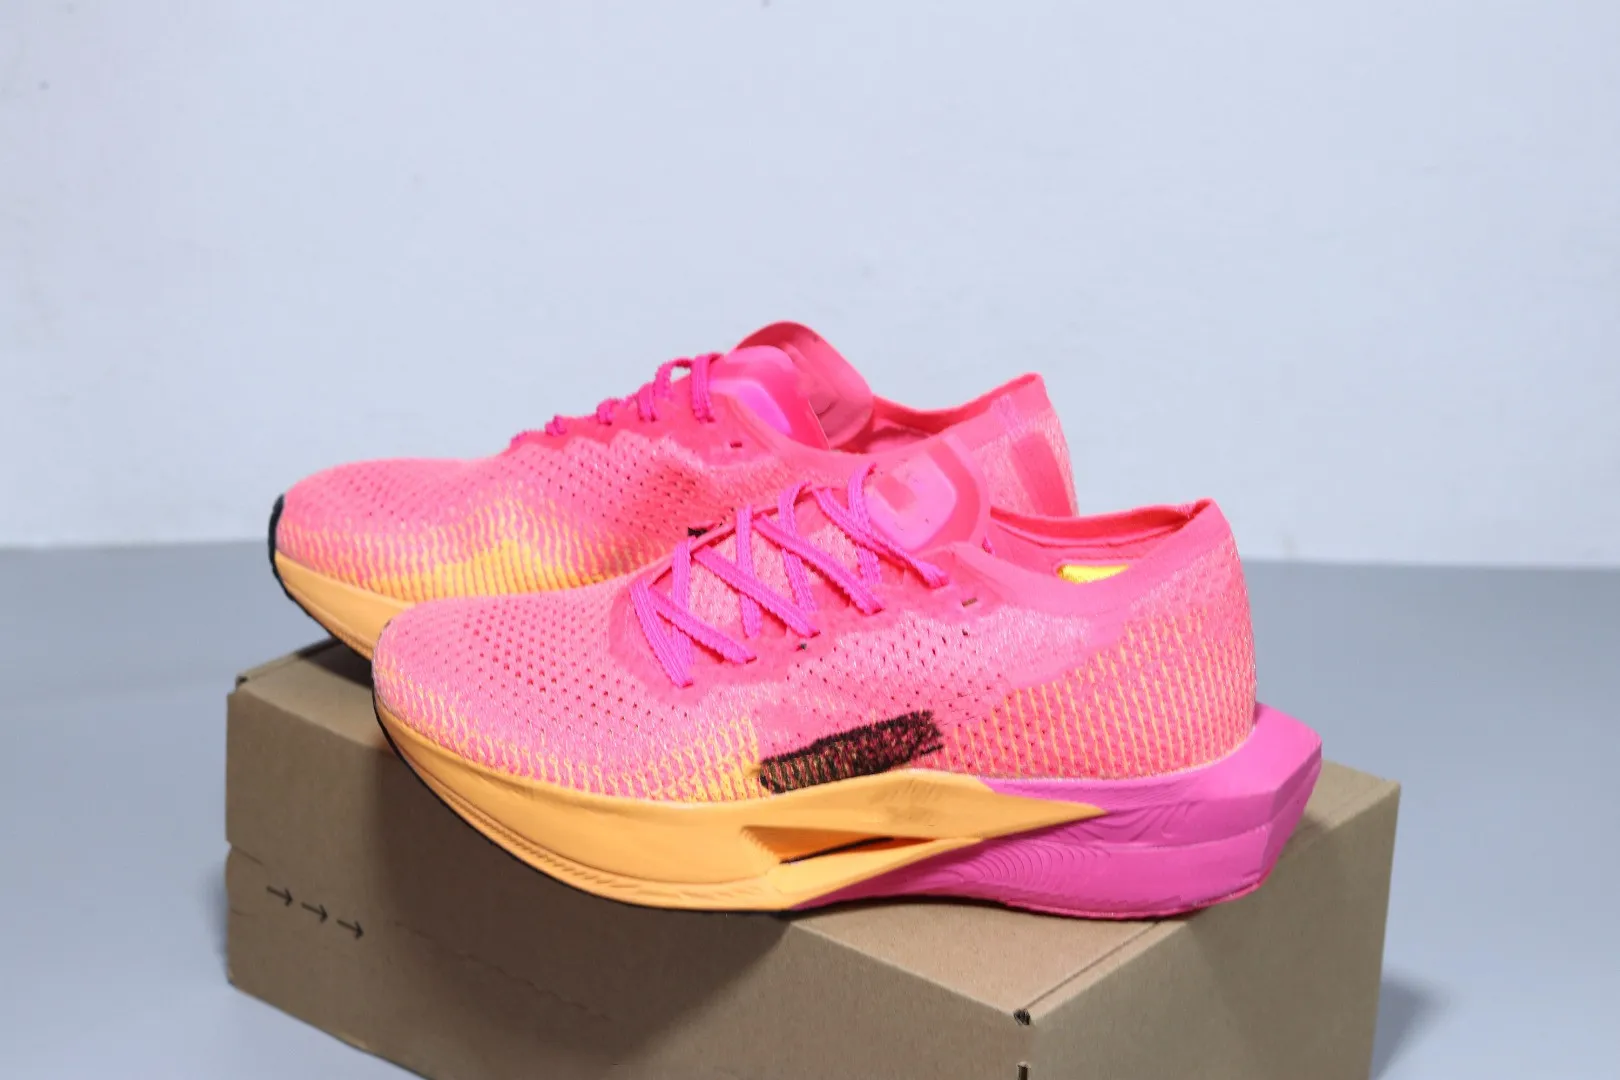 Discover 111+ colourful sneakers for men latest